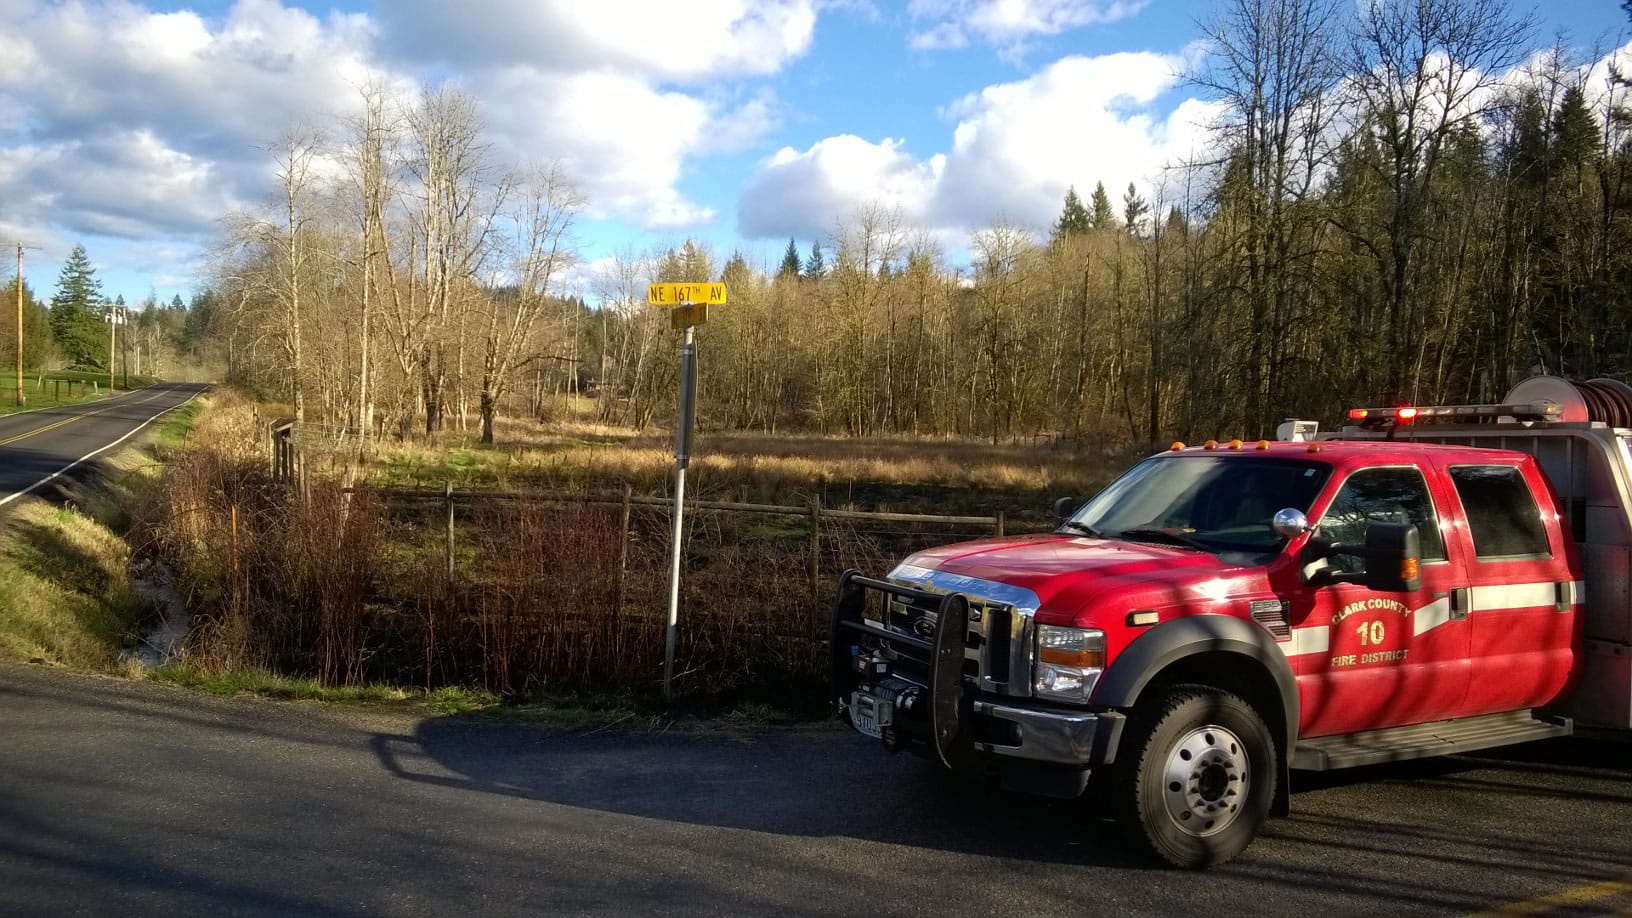 Crews from Clark County Fire District 10 responded to a quarter-acre grass fire in Fargher Lake in February 2015. A majority of voters in Fire District 10 approved a property tax levy increase for the district.